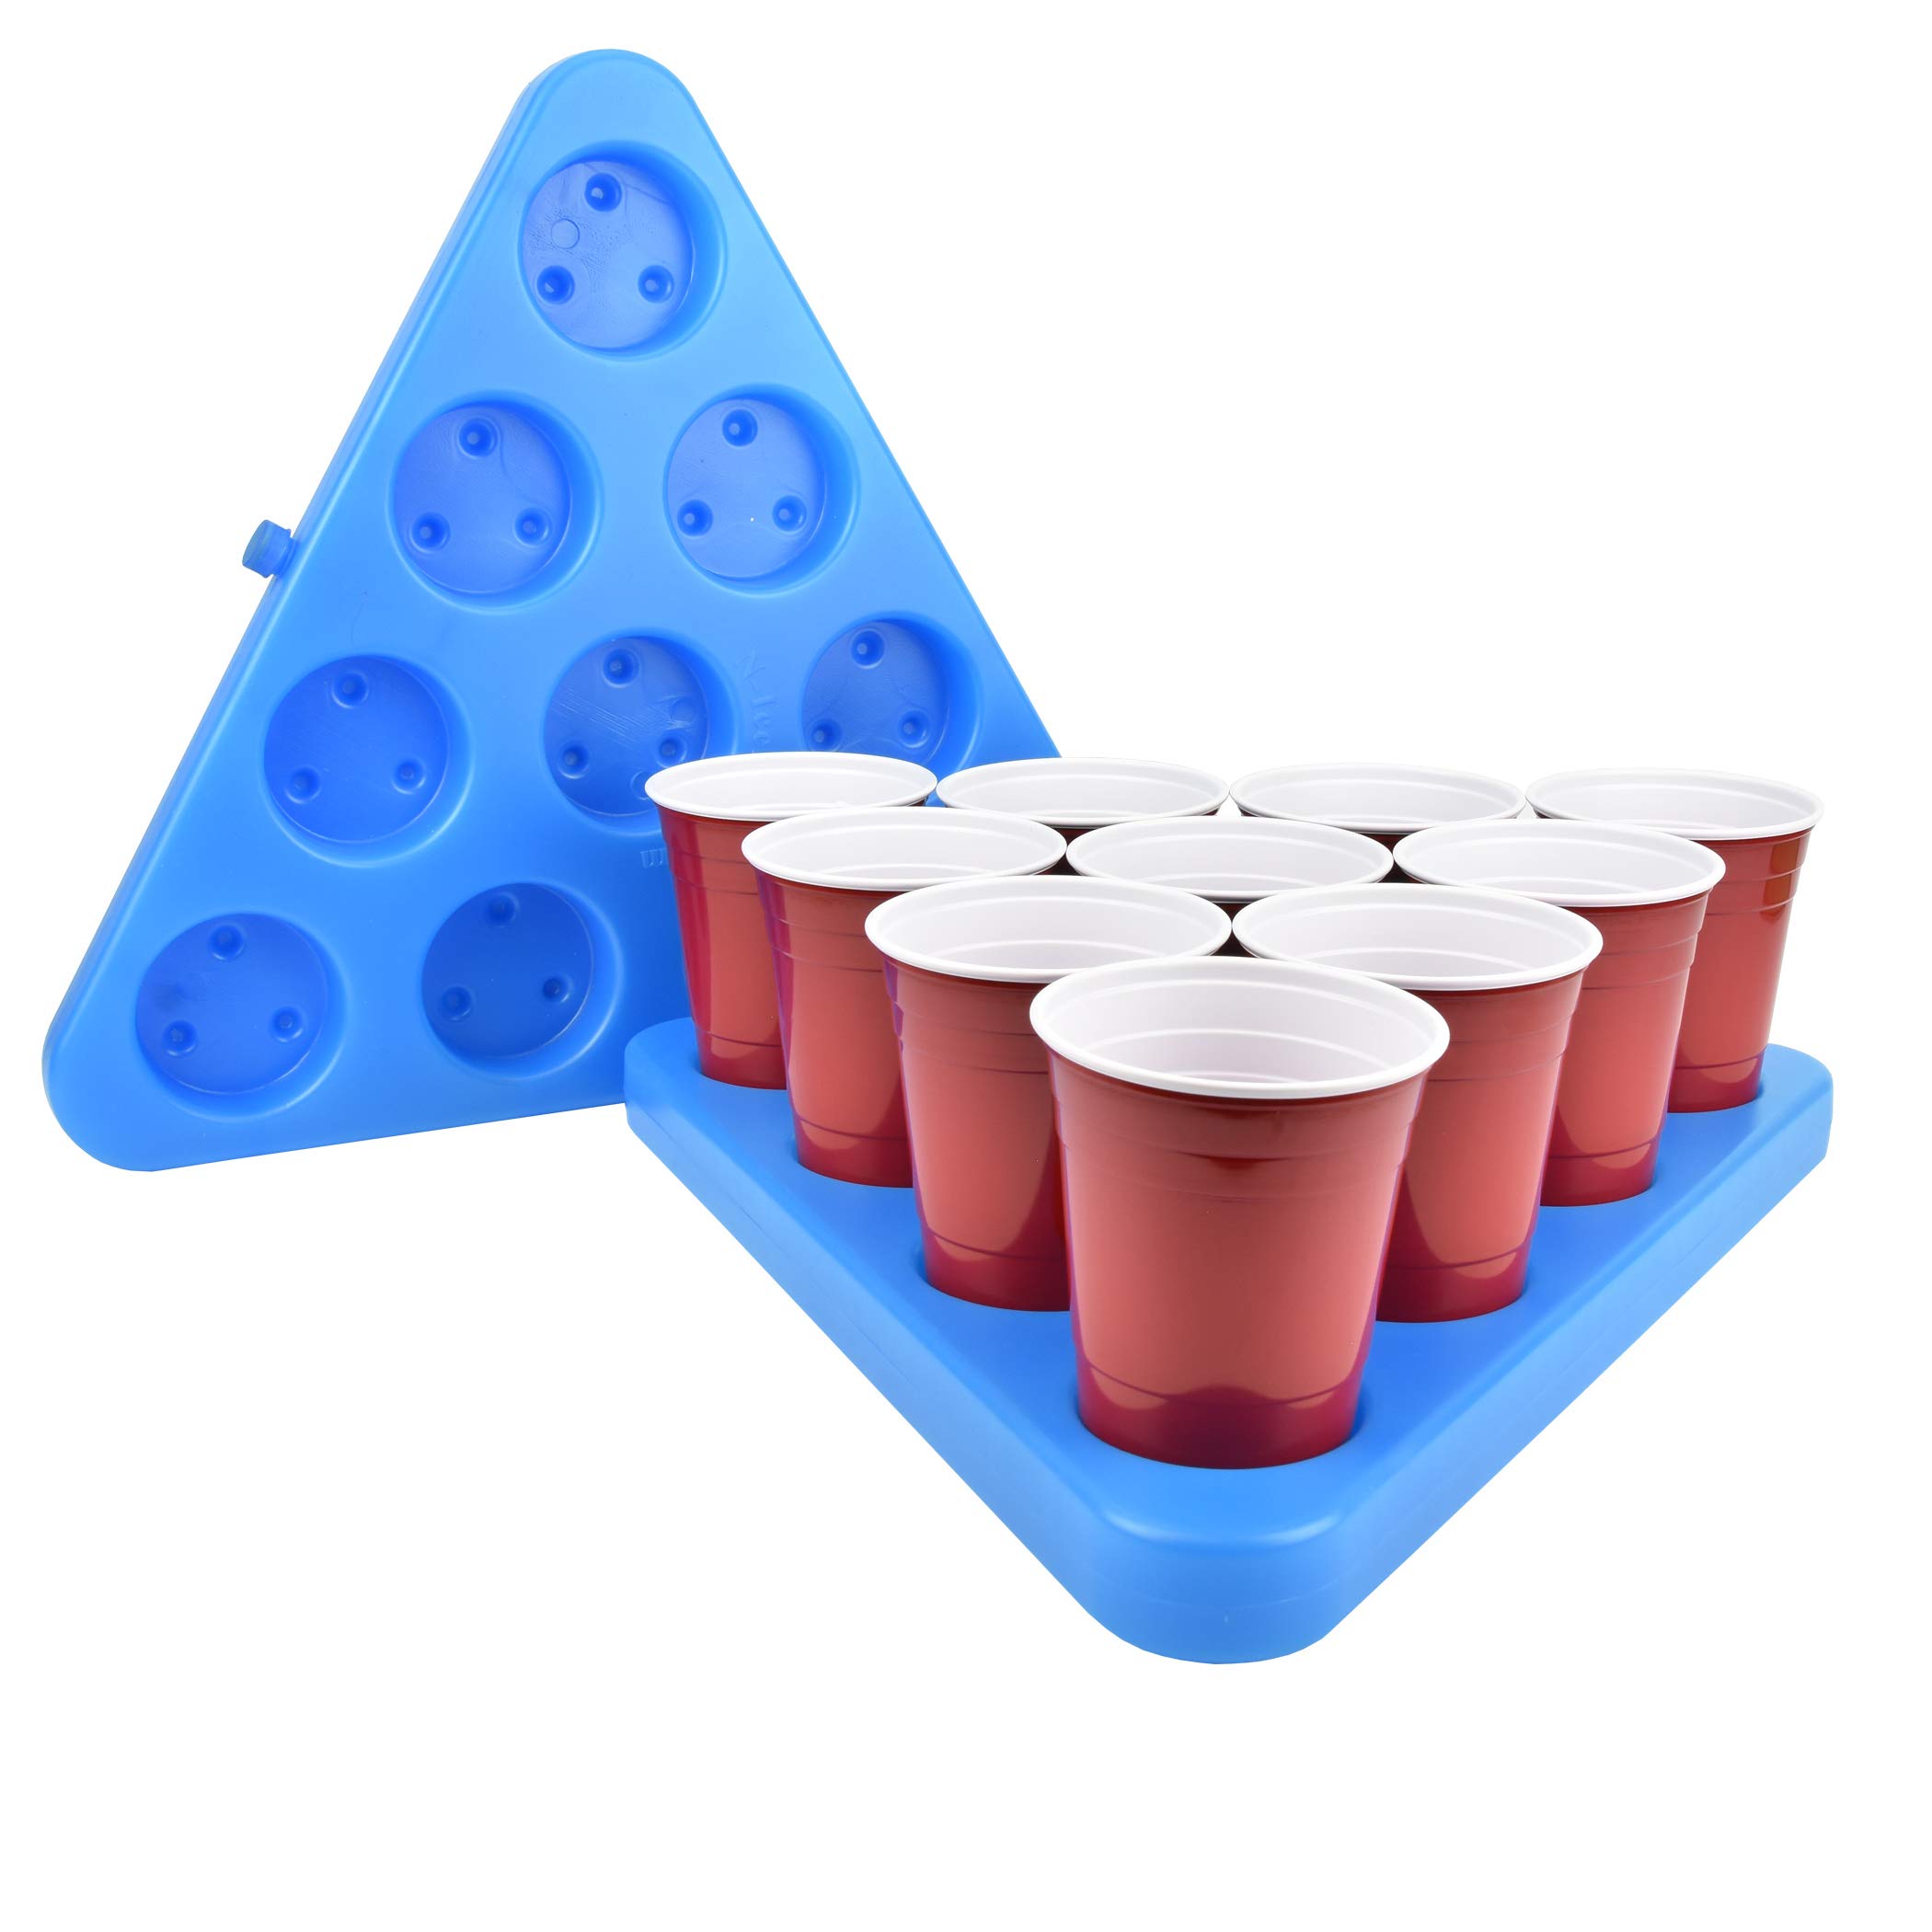 Cup Racks and Ball Holders for beer pong